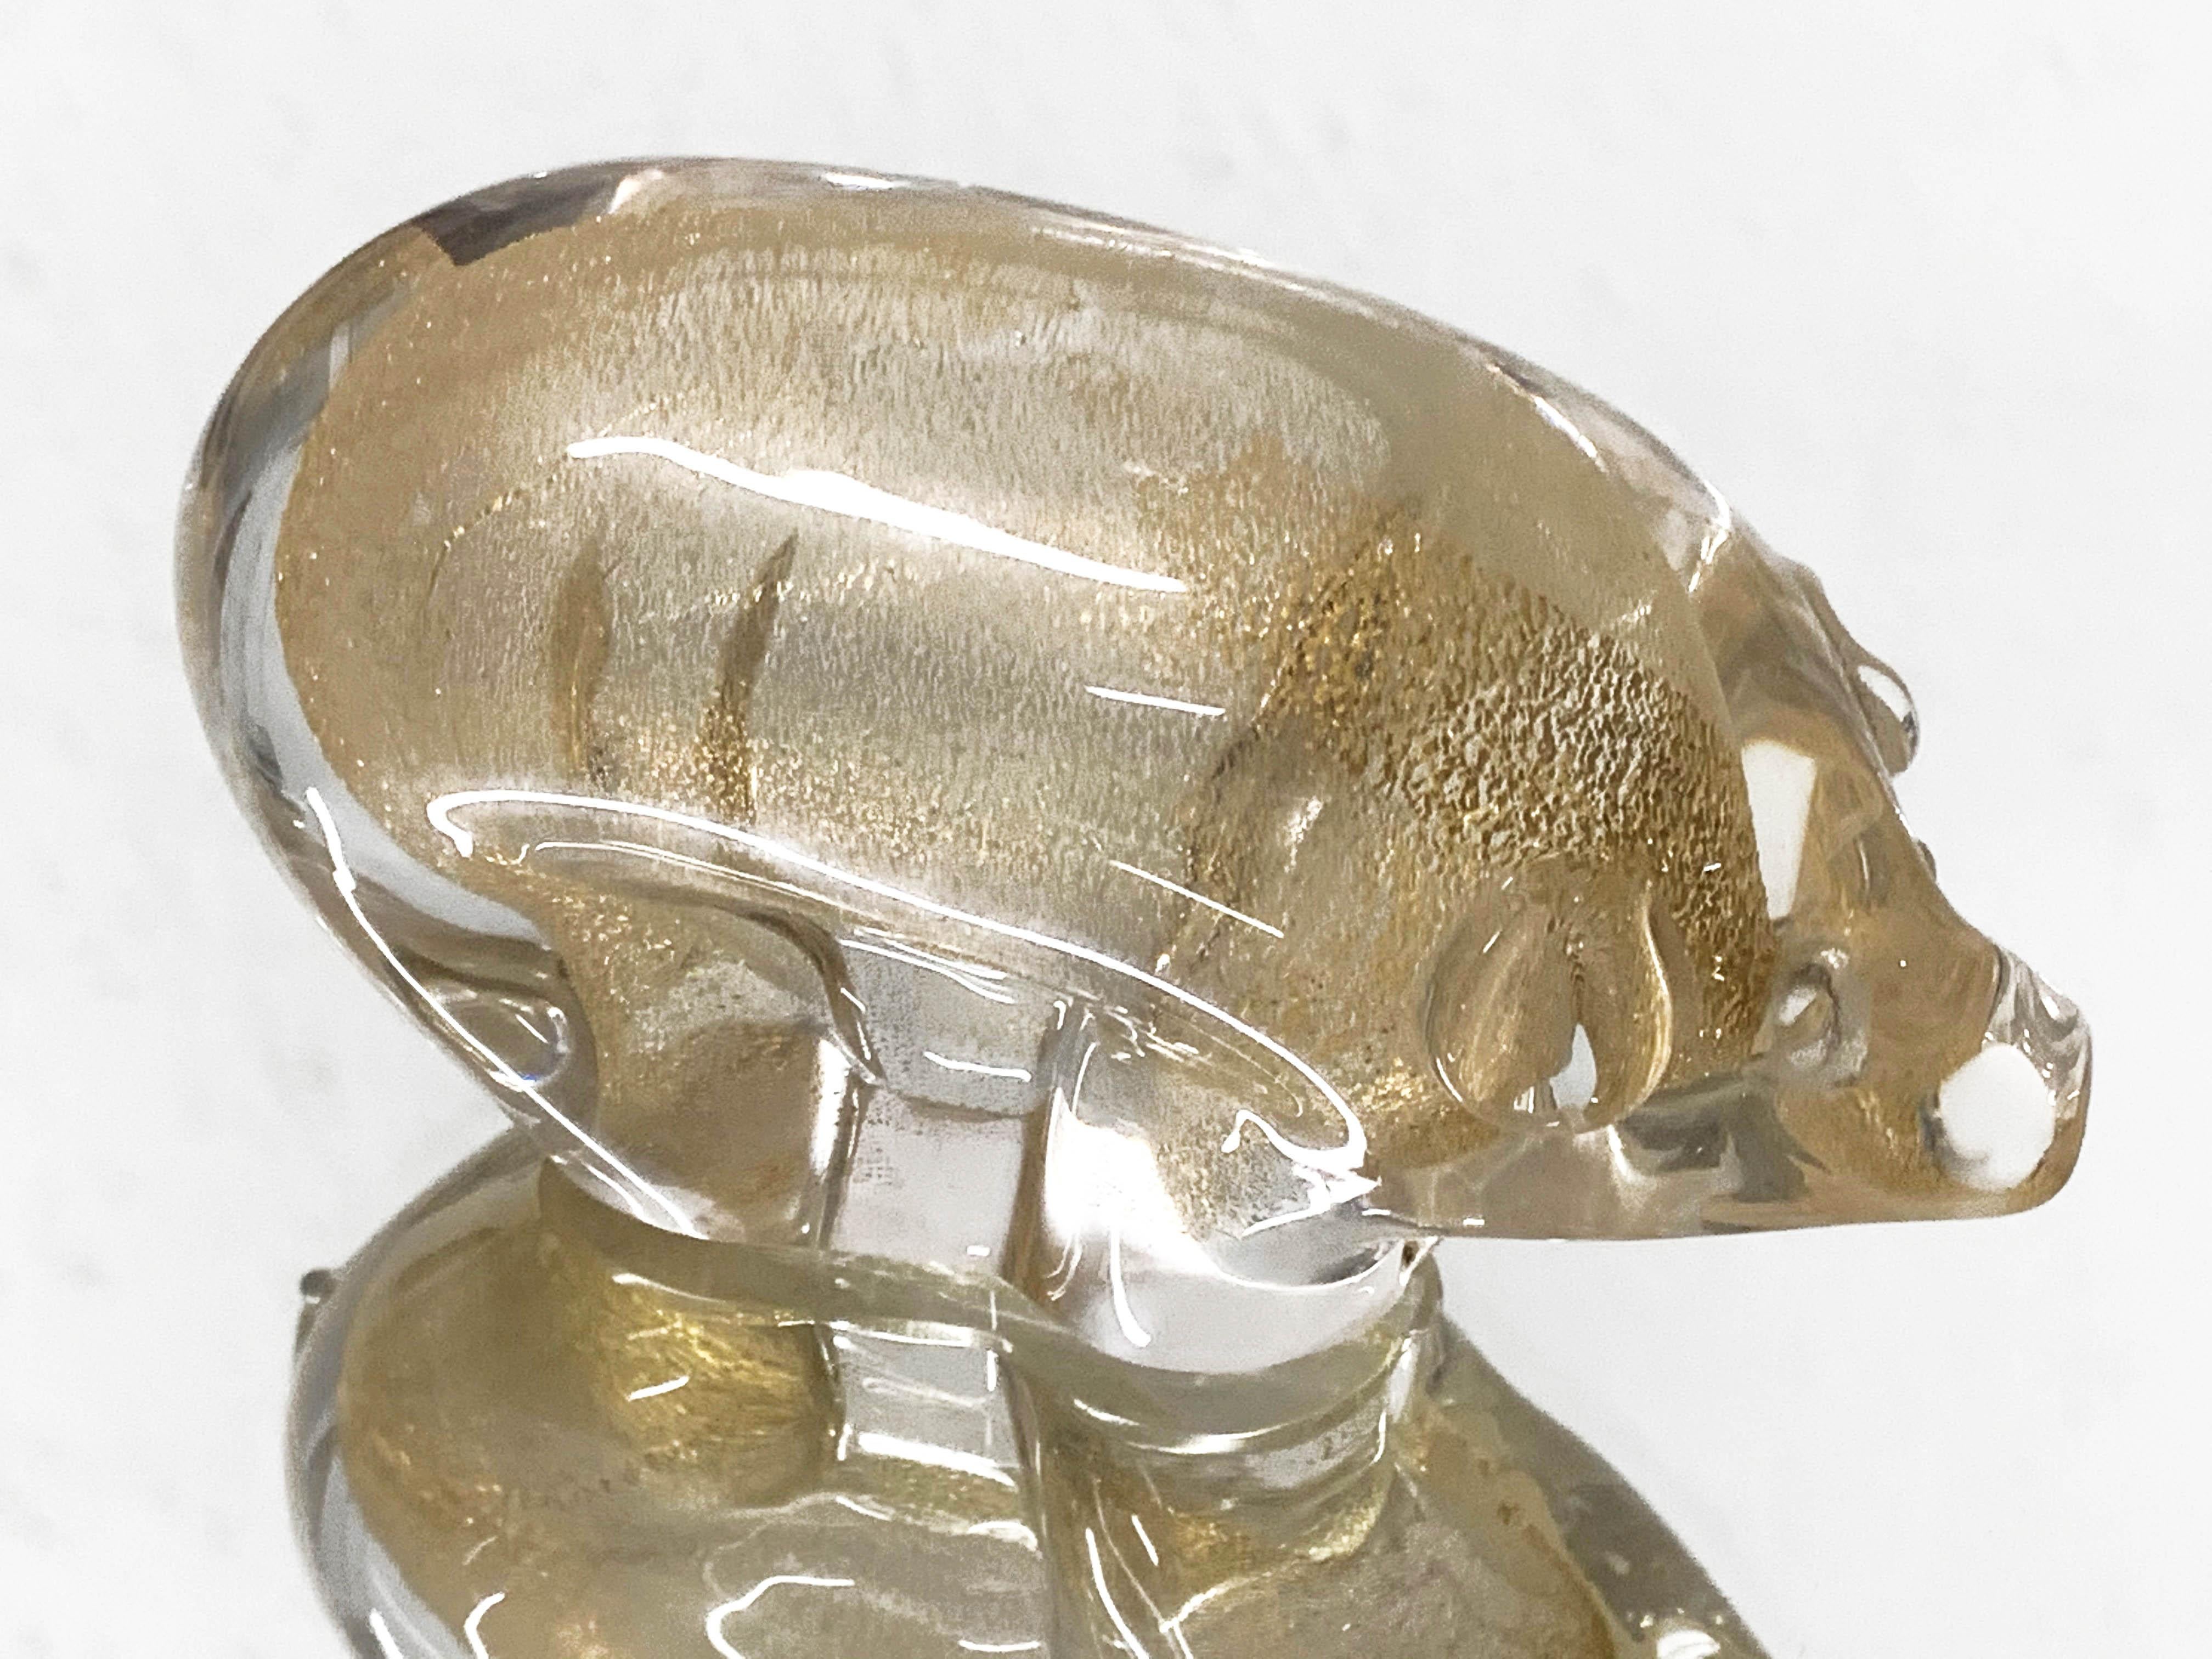 Beautiful hand blown midcentury artistic Murano glass pig sculpture with gold dots. This amazing item is attributed to the designer Archimede Seguso and was produced in Italy during the 1960s.

This sculpture is amazing as Seguso was able to blow